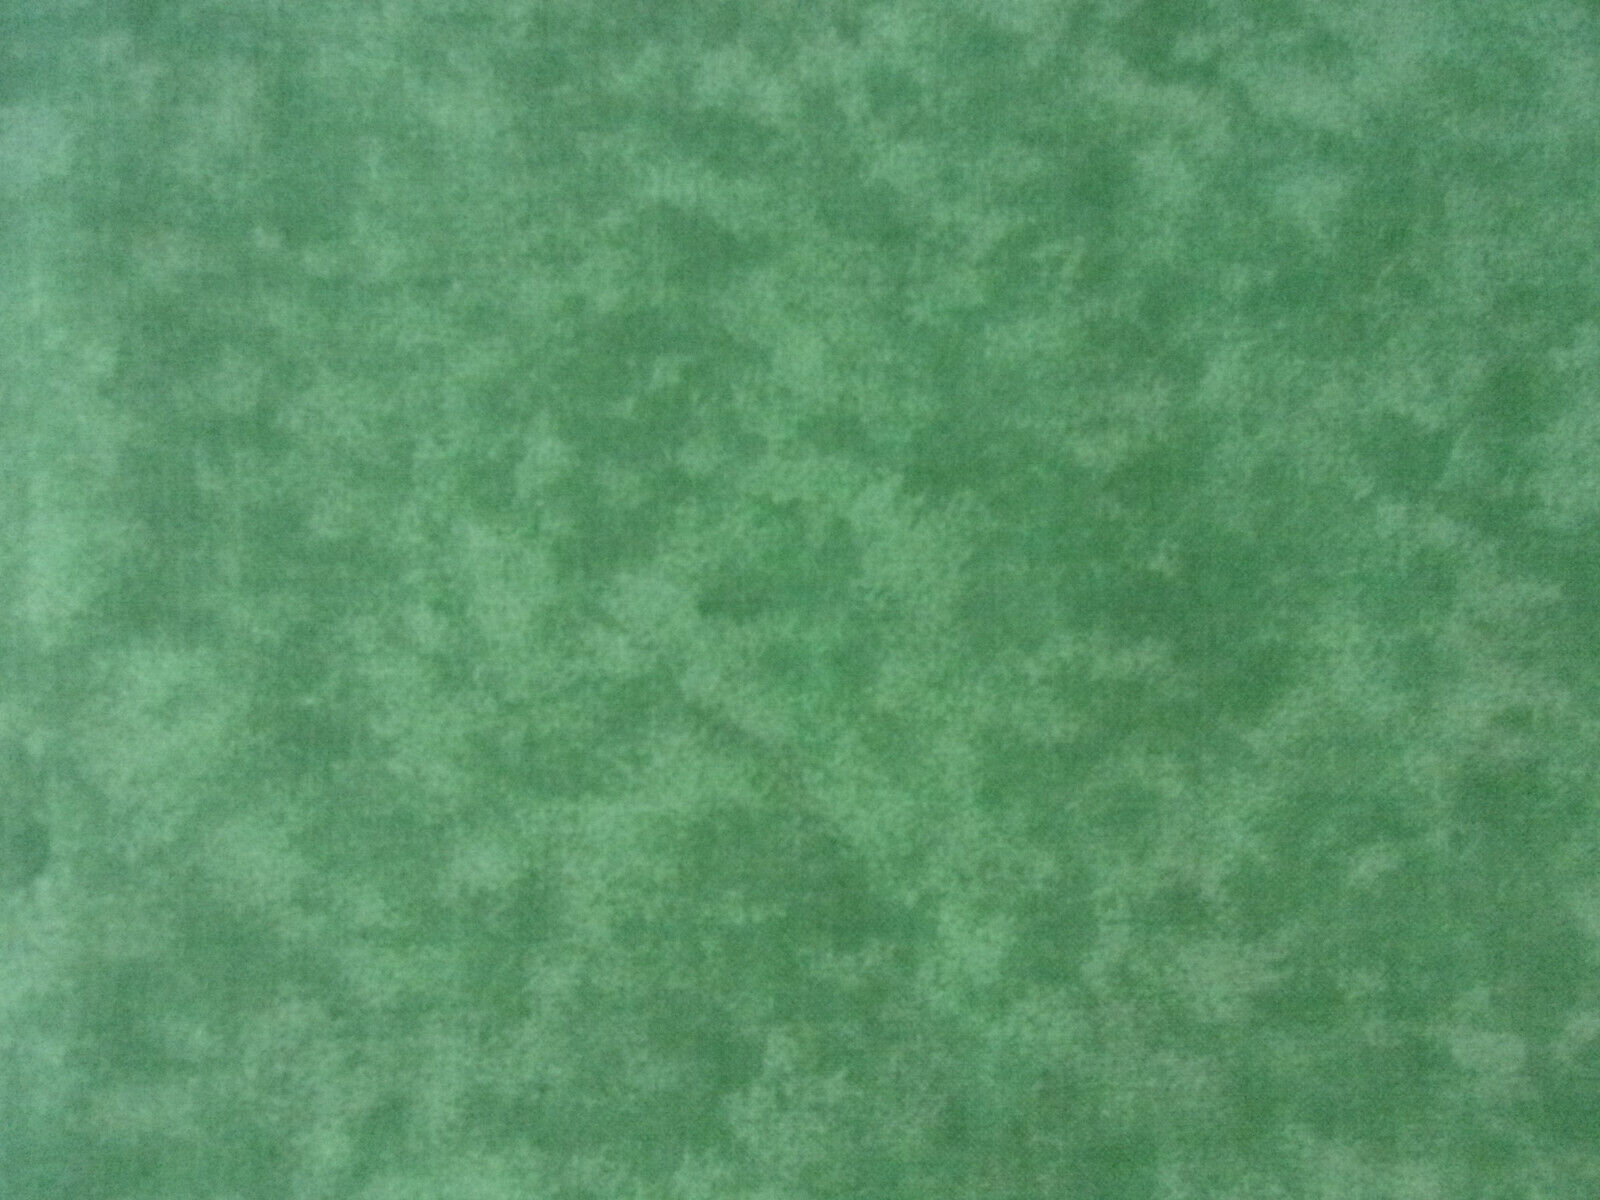 Grass Green Mottled Quilter's Blender Cotton Quilting Sewing Fabric - 1 Yard